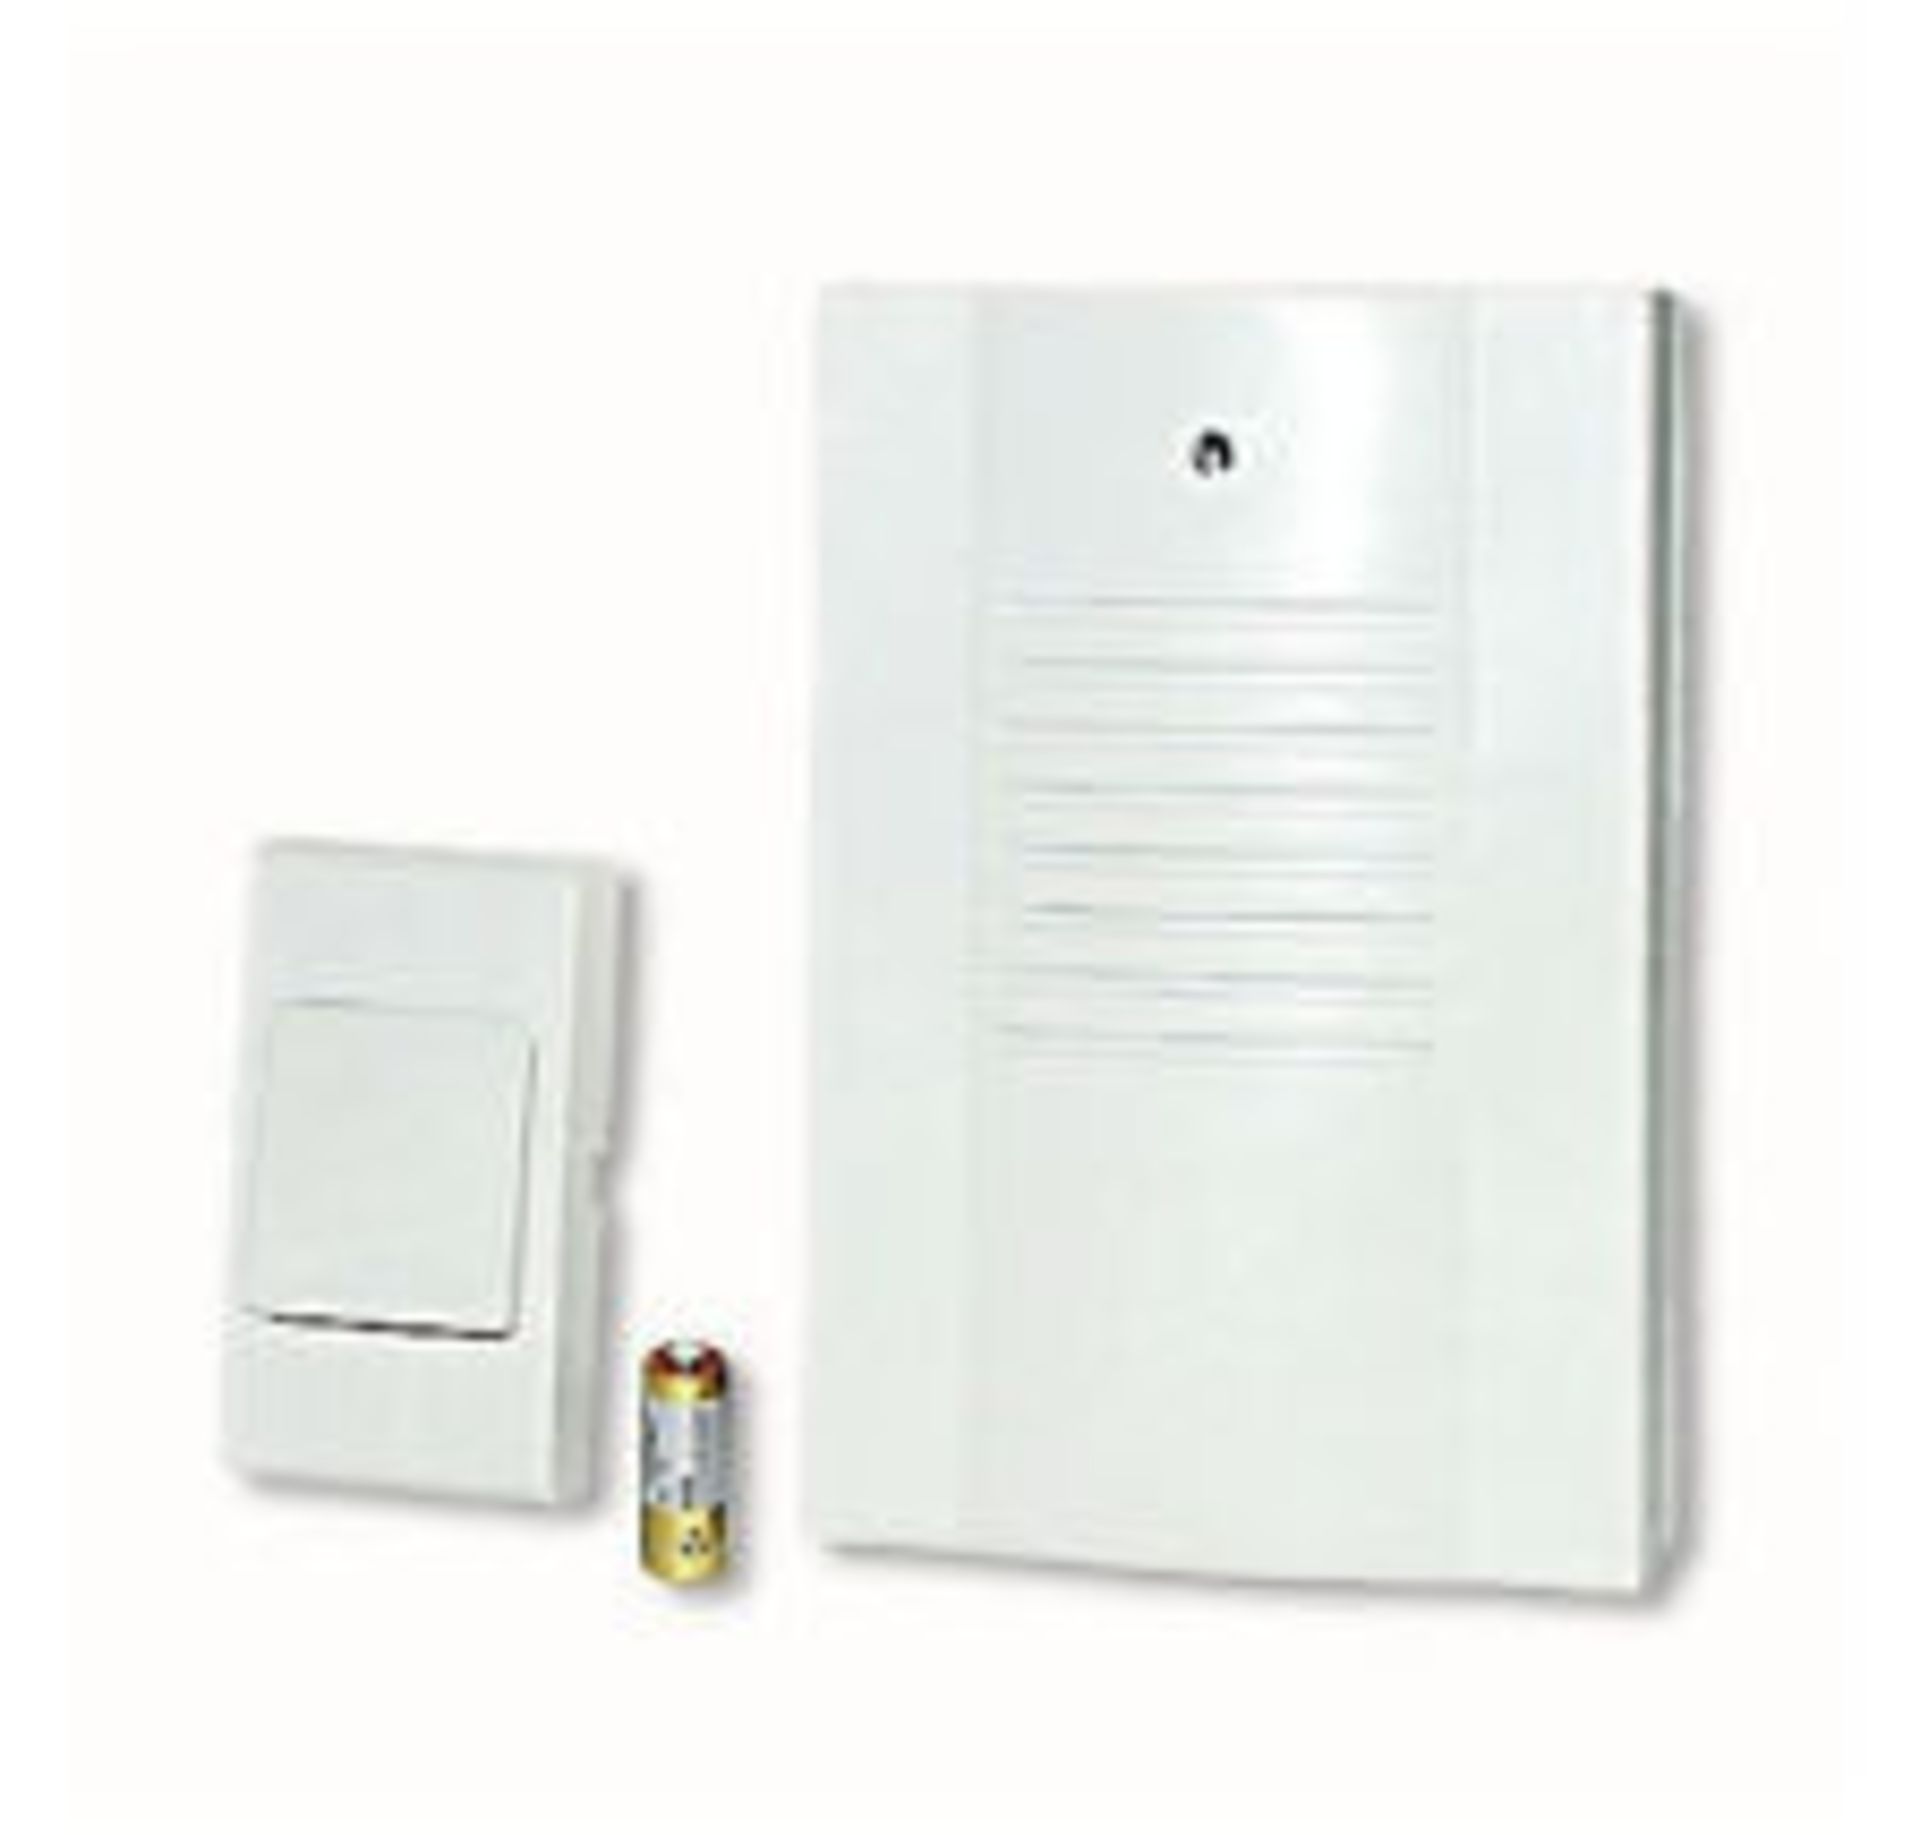 V Brand New Wireless Doorbell With 16 Different Melodies And Up To 30 Metre Range X 2 YOUR BID PRICE